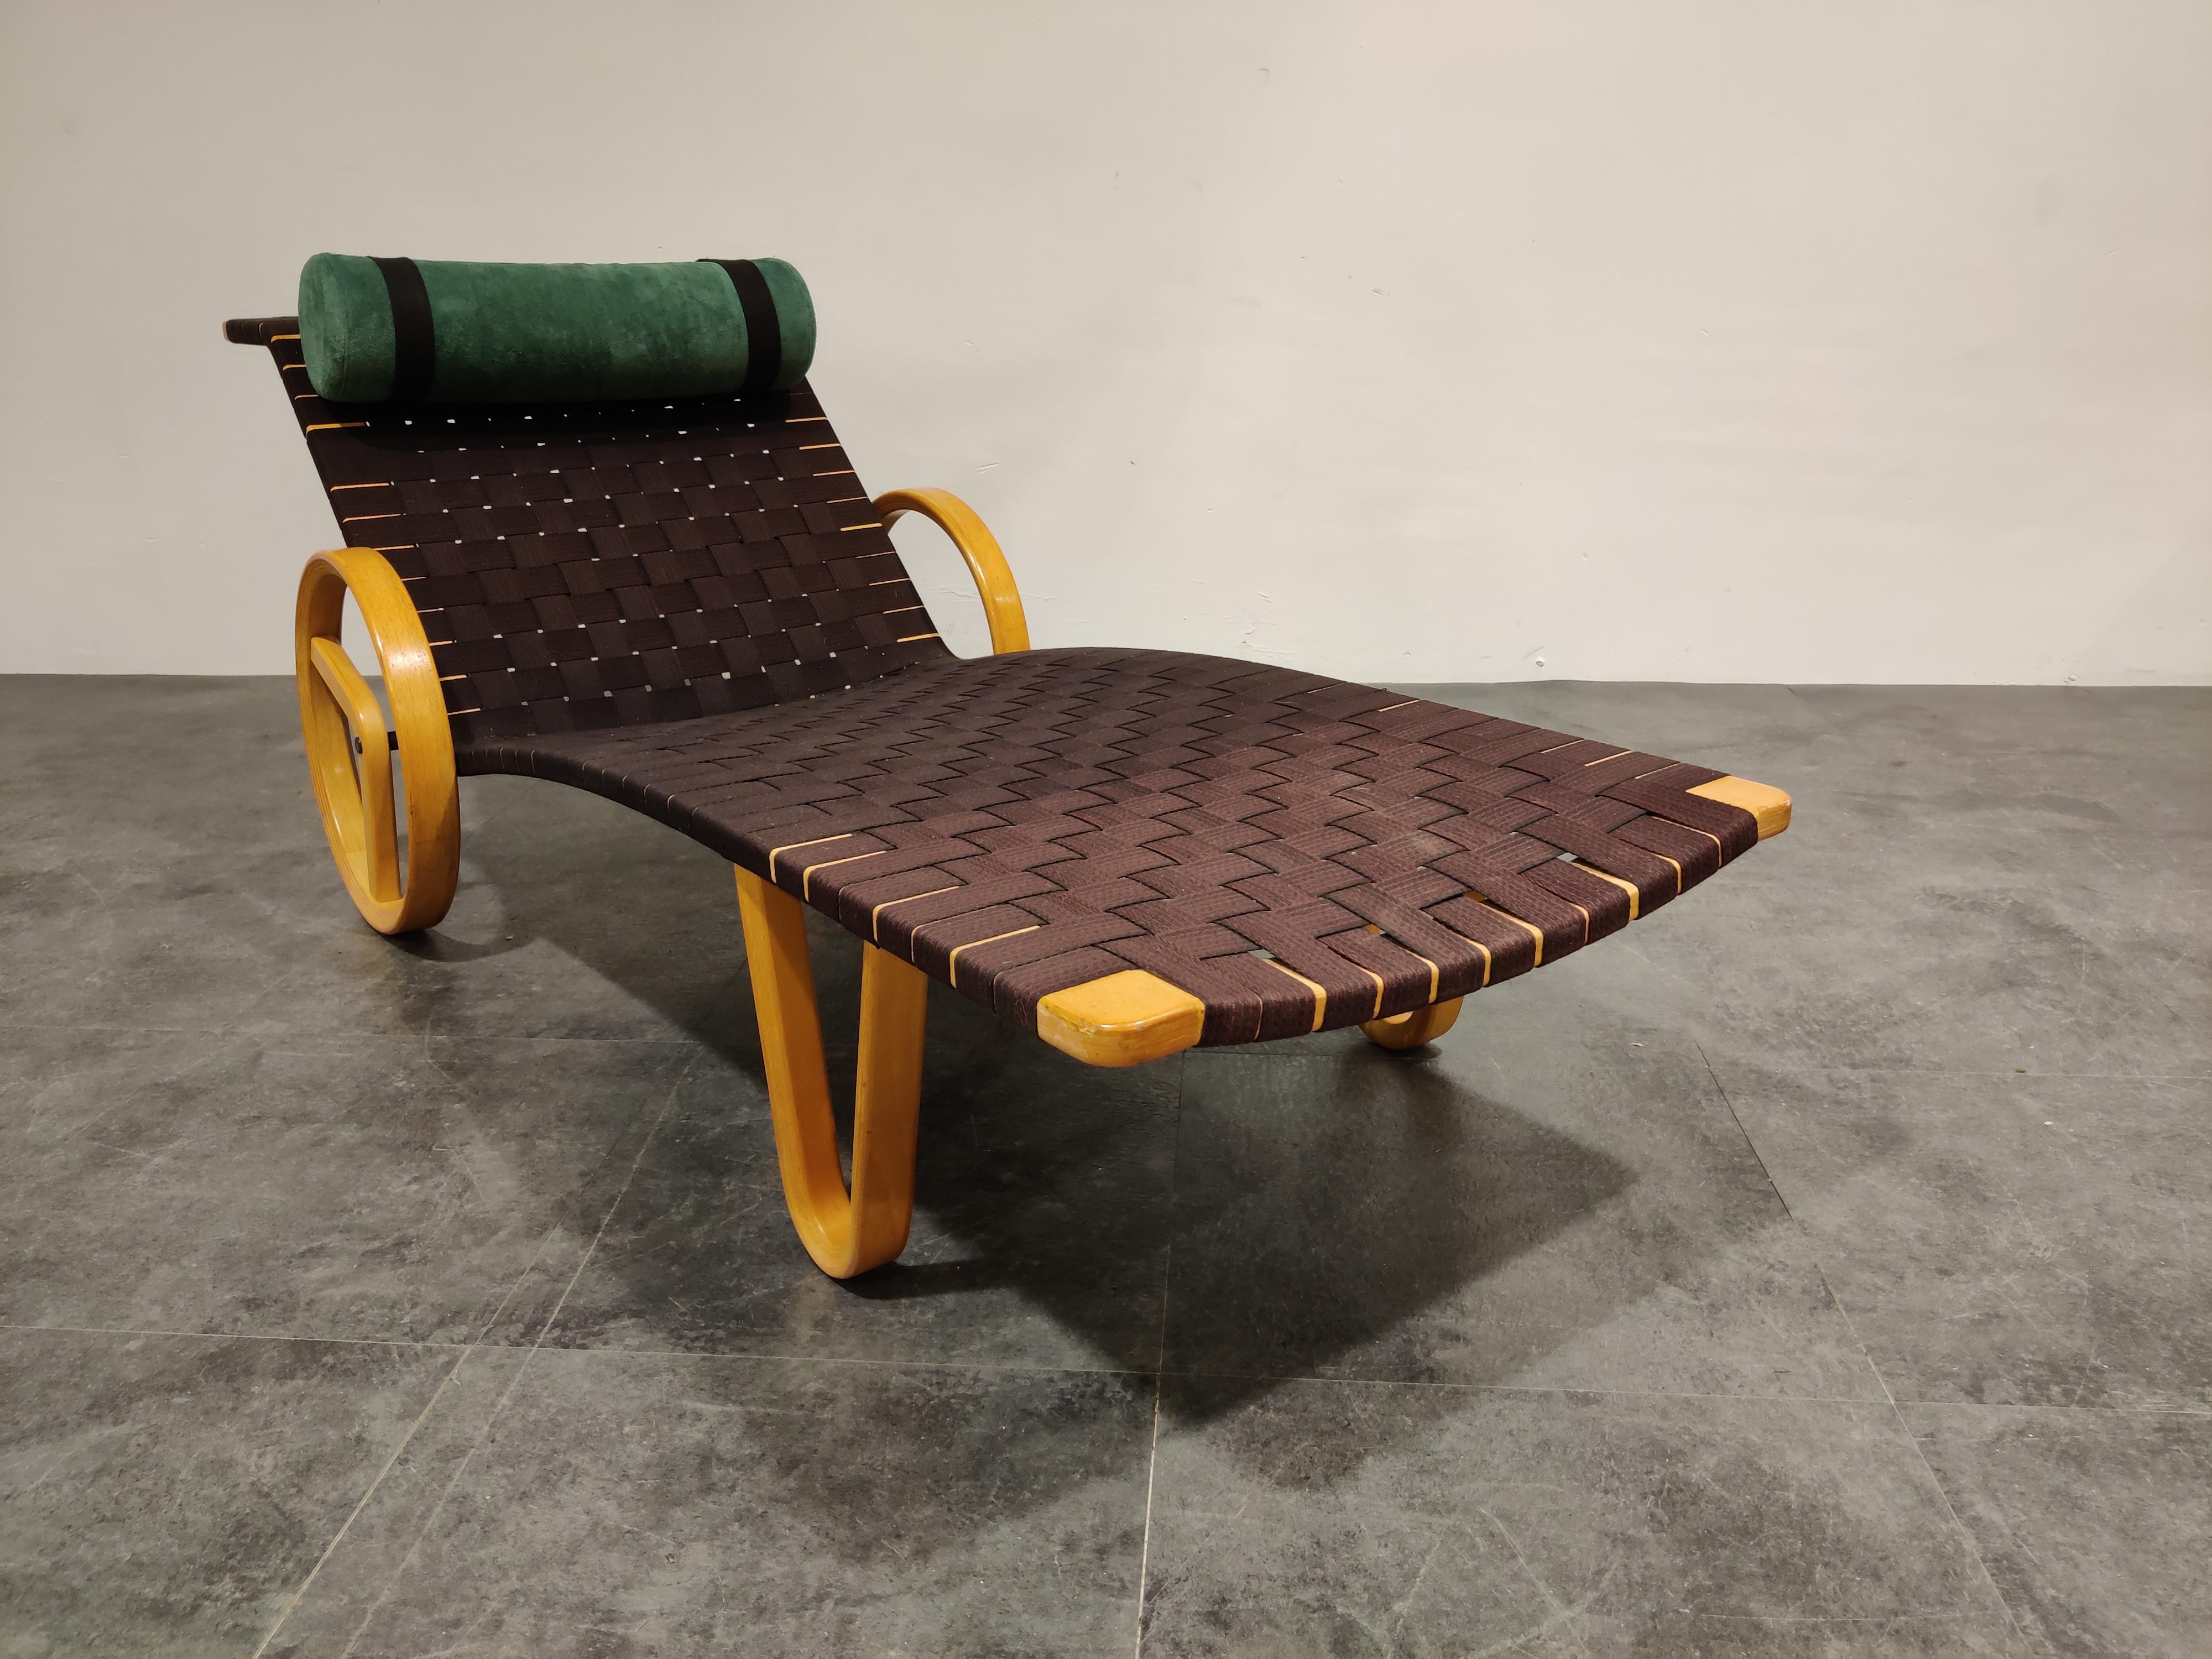 Vintage 'chaise longue' designed by Rud Thygesen and Johnny Sorensen in 1969

The chair looks very modern and has a very eye-catching design.

Made from birch wood.

Comes with the original green velvet cushion. 

1970s,